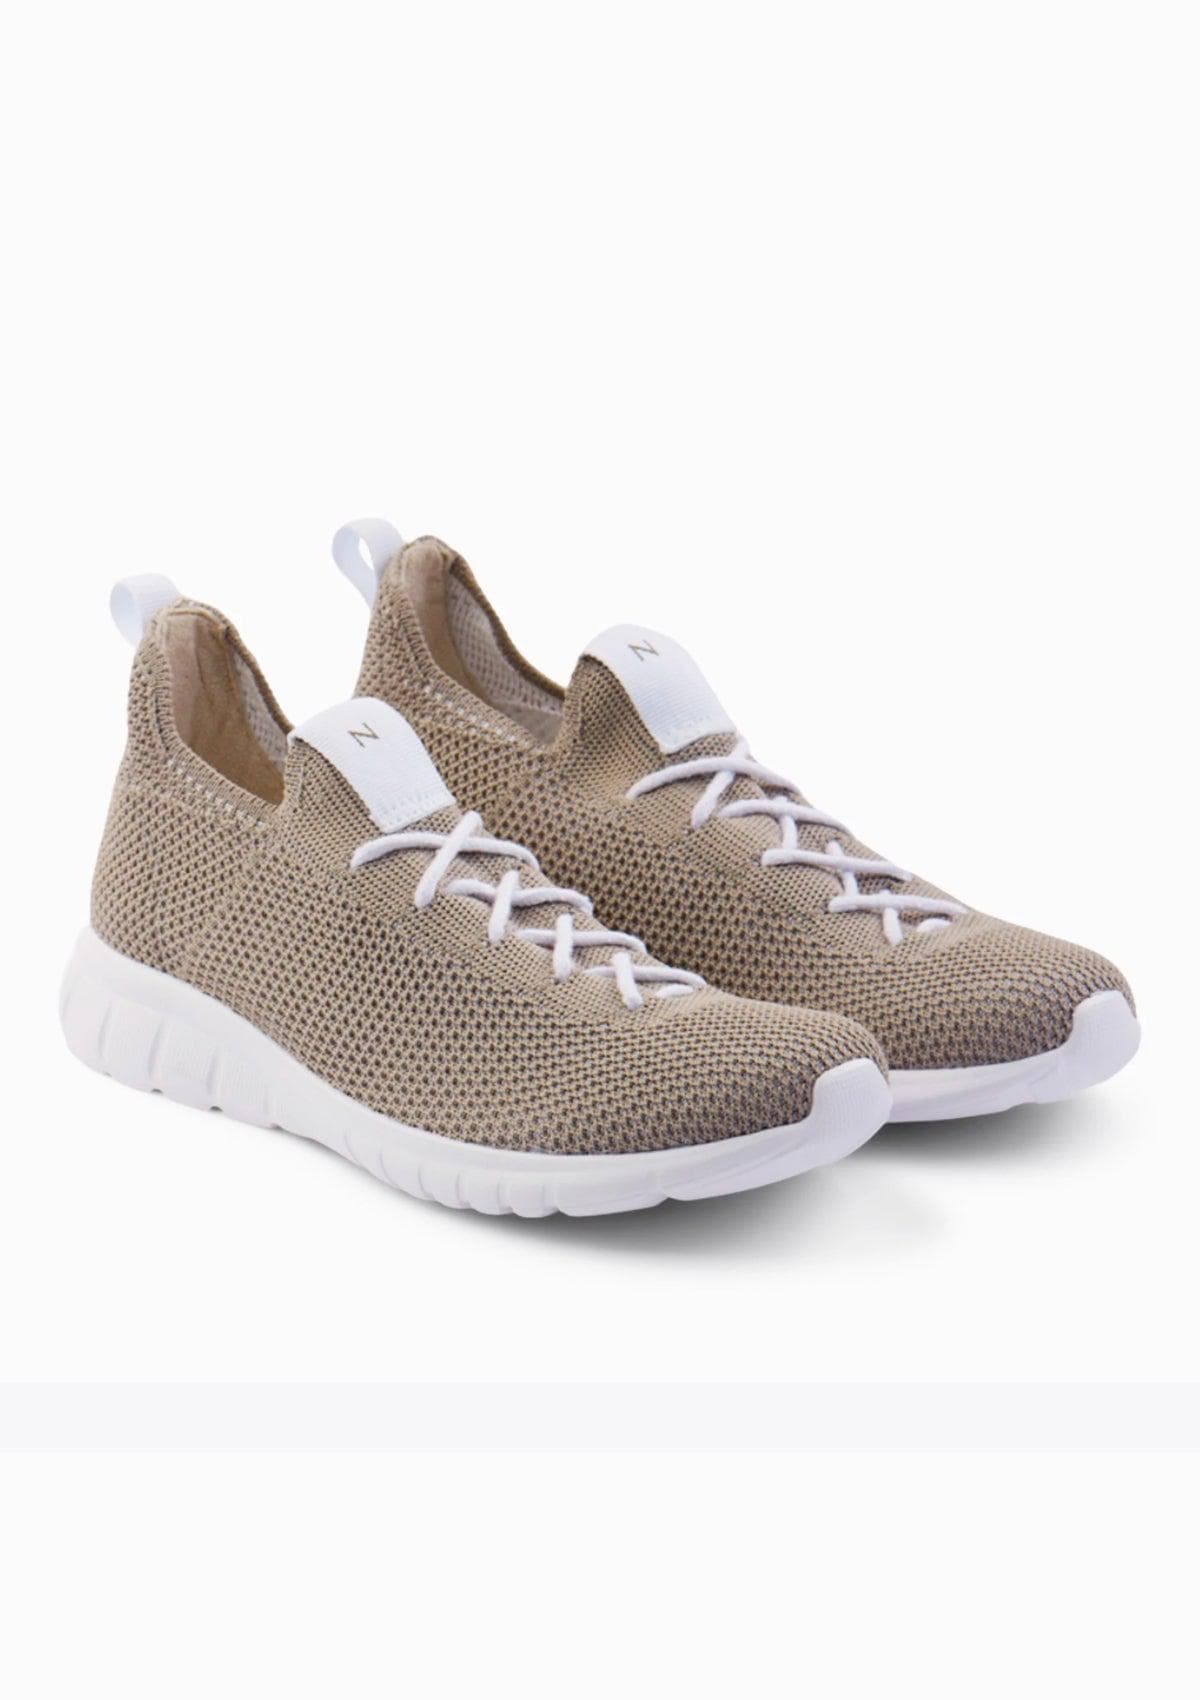 Nisolo Womens Athleisure Eco Knit Sneaker - Grey